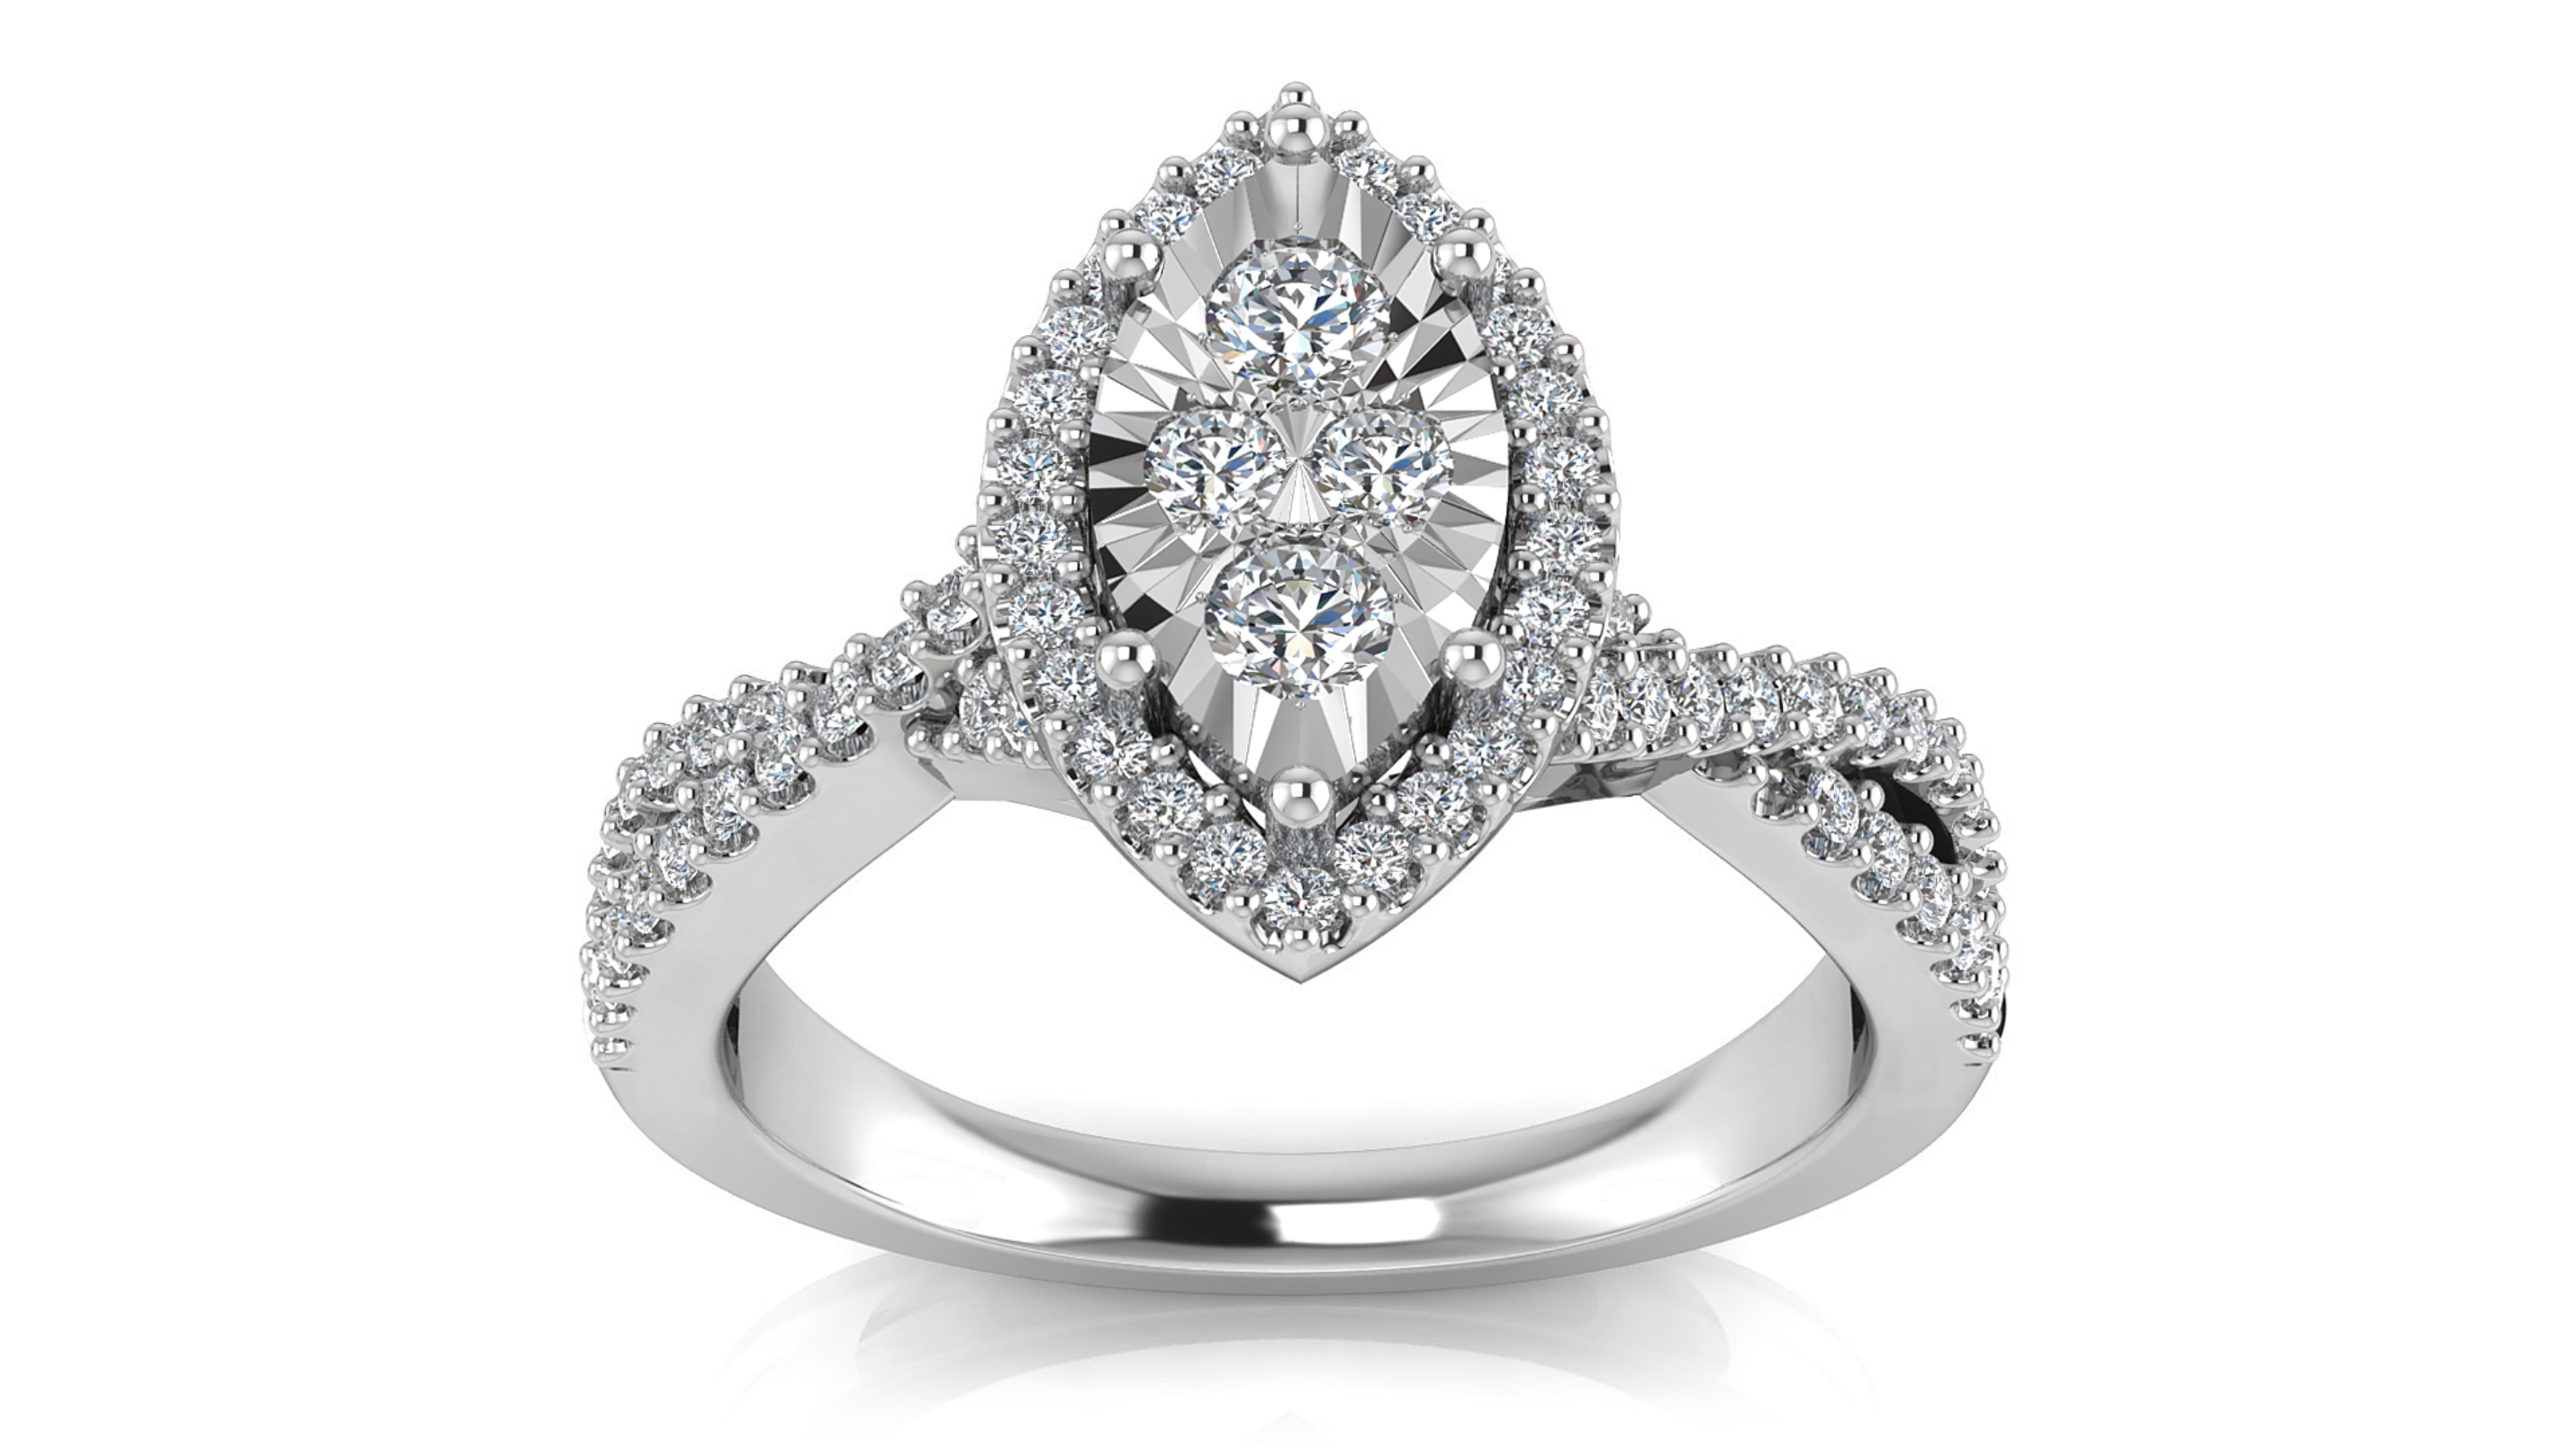 Tru Miracle 10K White Gold 0.50 CTTW Marquis Engagement Ring - Size 7 Only